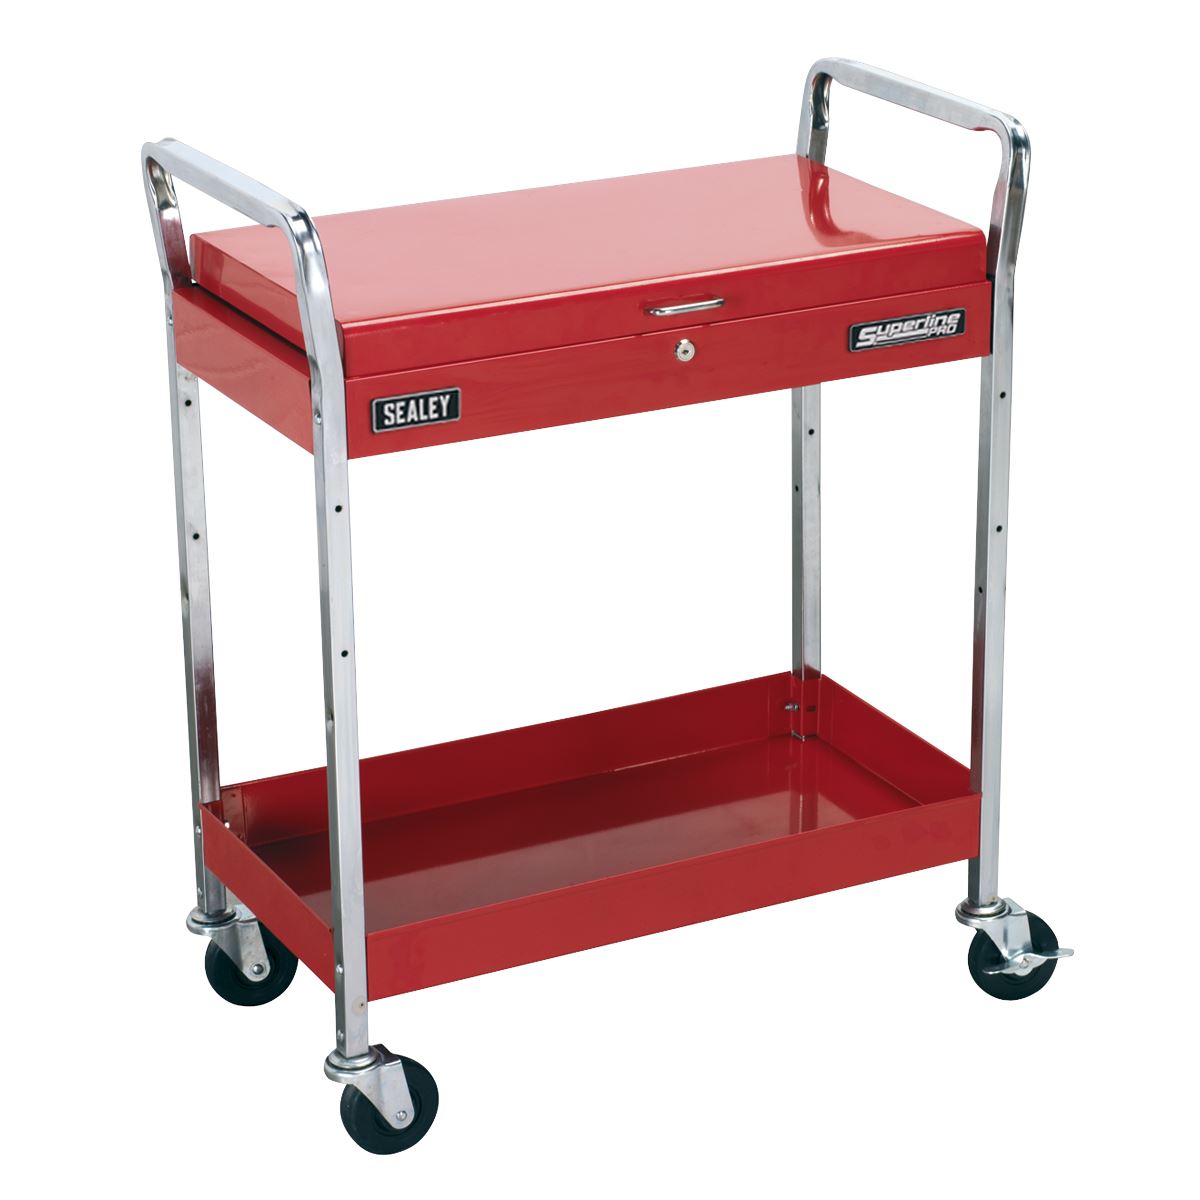 Sealey Trolley 2-Level Heavy-Duty with Lockable Top CX104